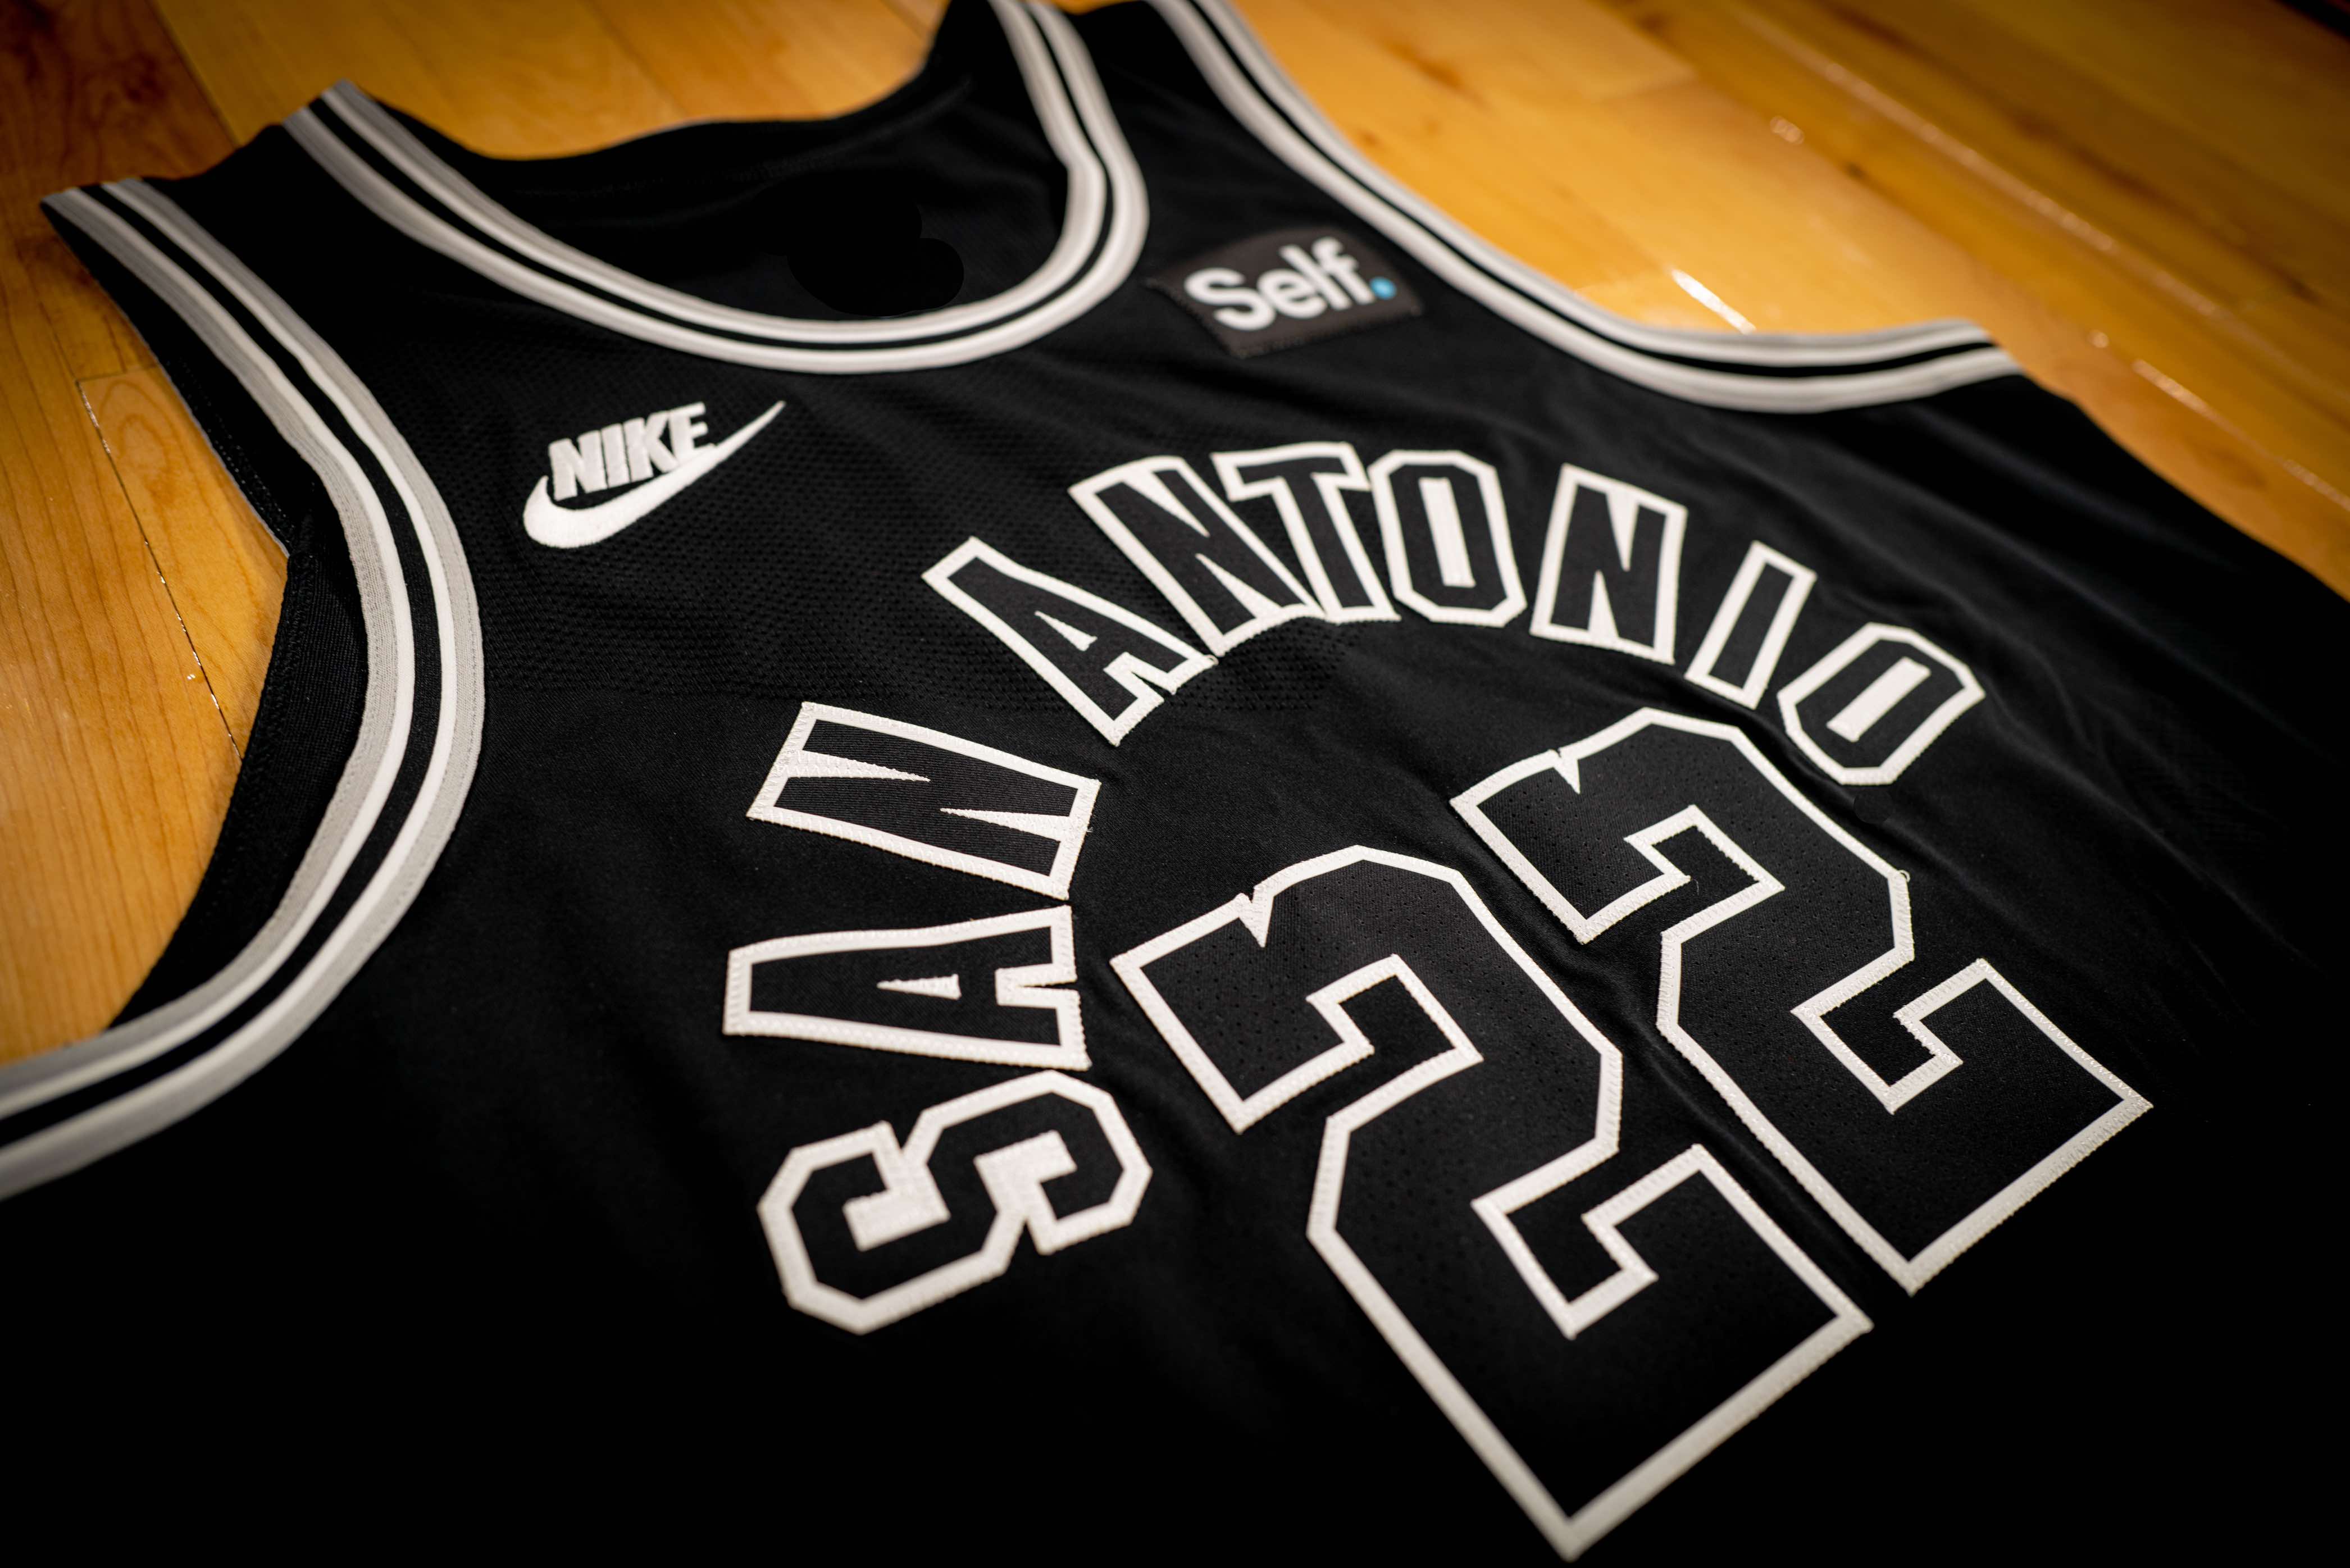 SPURS UNVEIL CLASSIC EDITION UNIFORMS FOR THEIR 50TH ANNIVERSARY